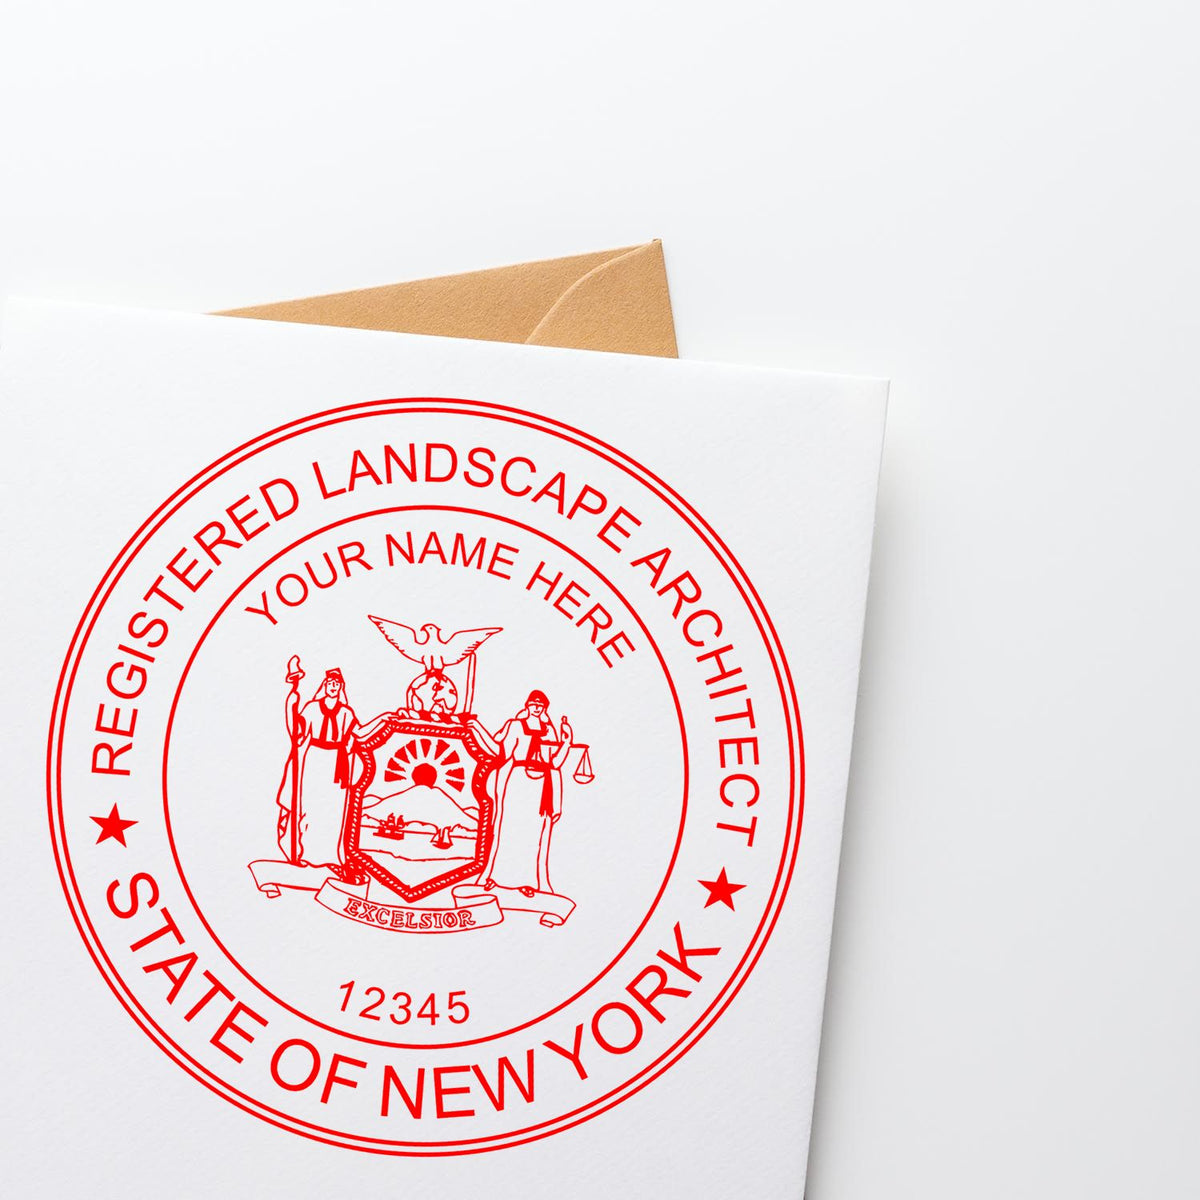 A photograph of the Digital New York Landscape Architect Stamp stamp impression reveals a vivid, professional image of the on paper.